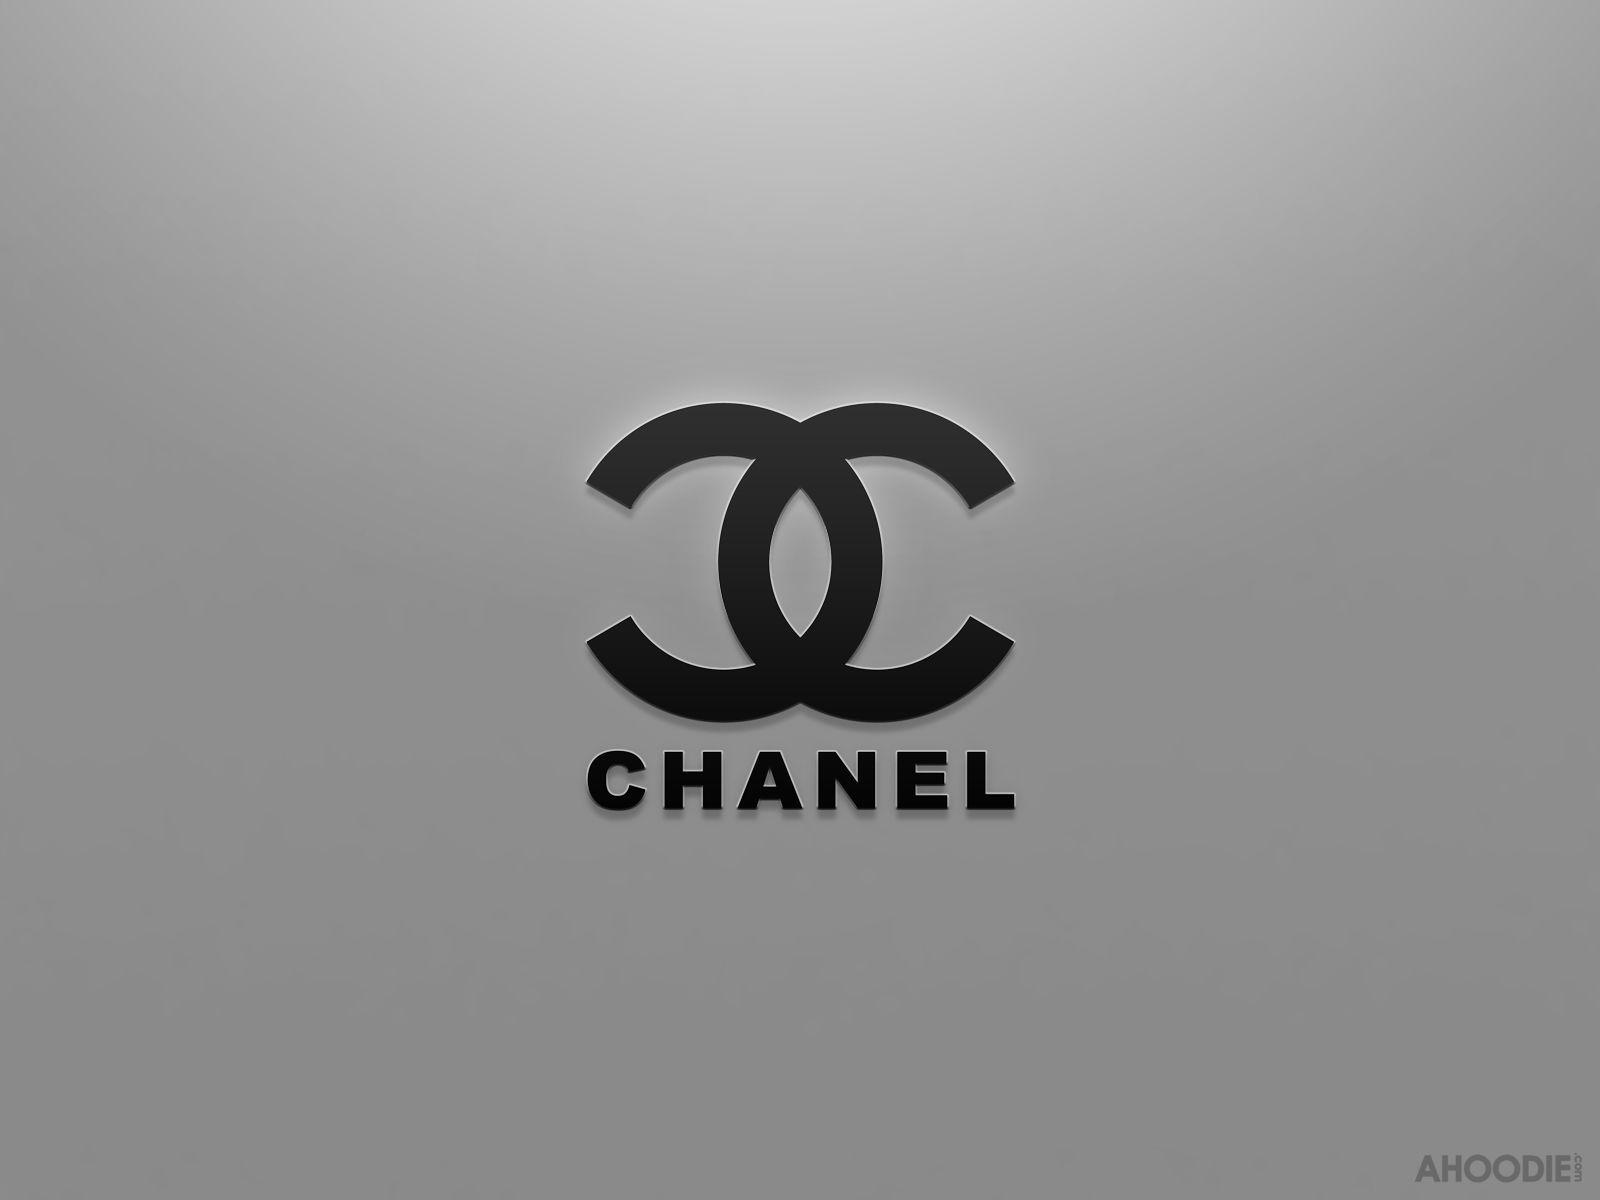 Dripping Chanel Logo - Chanel Logo Wallpapers - Wallpaper Cave